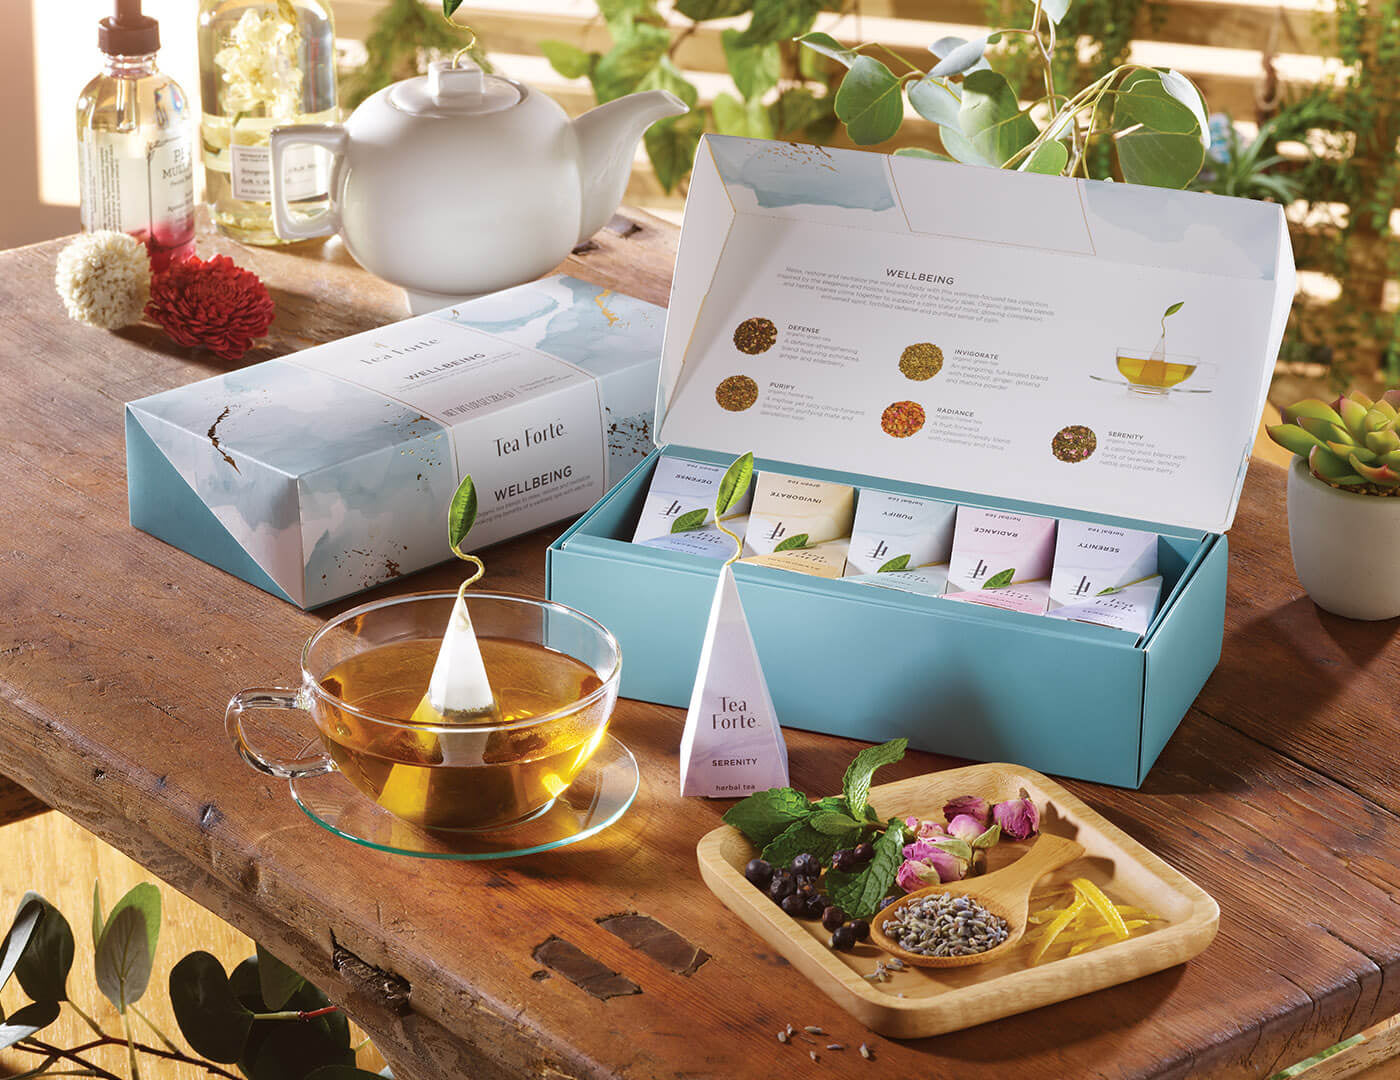 Wellbeing tea assortment in a 10 count petite presentation box on table